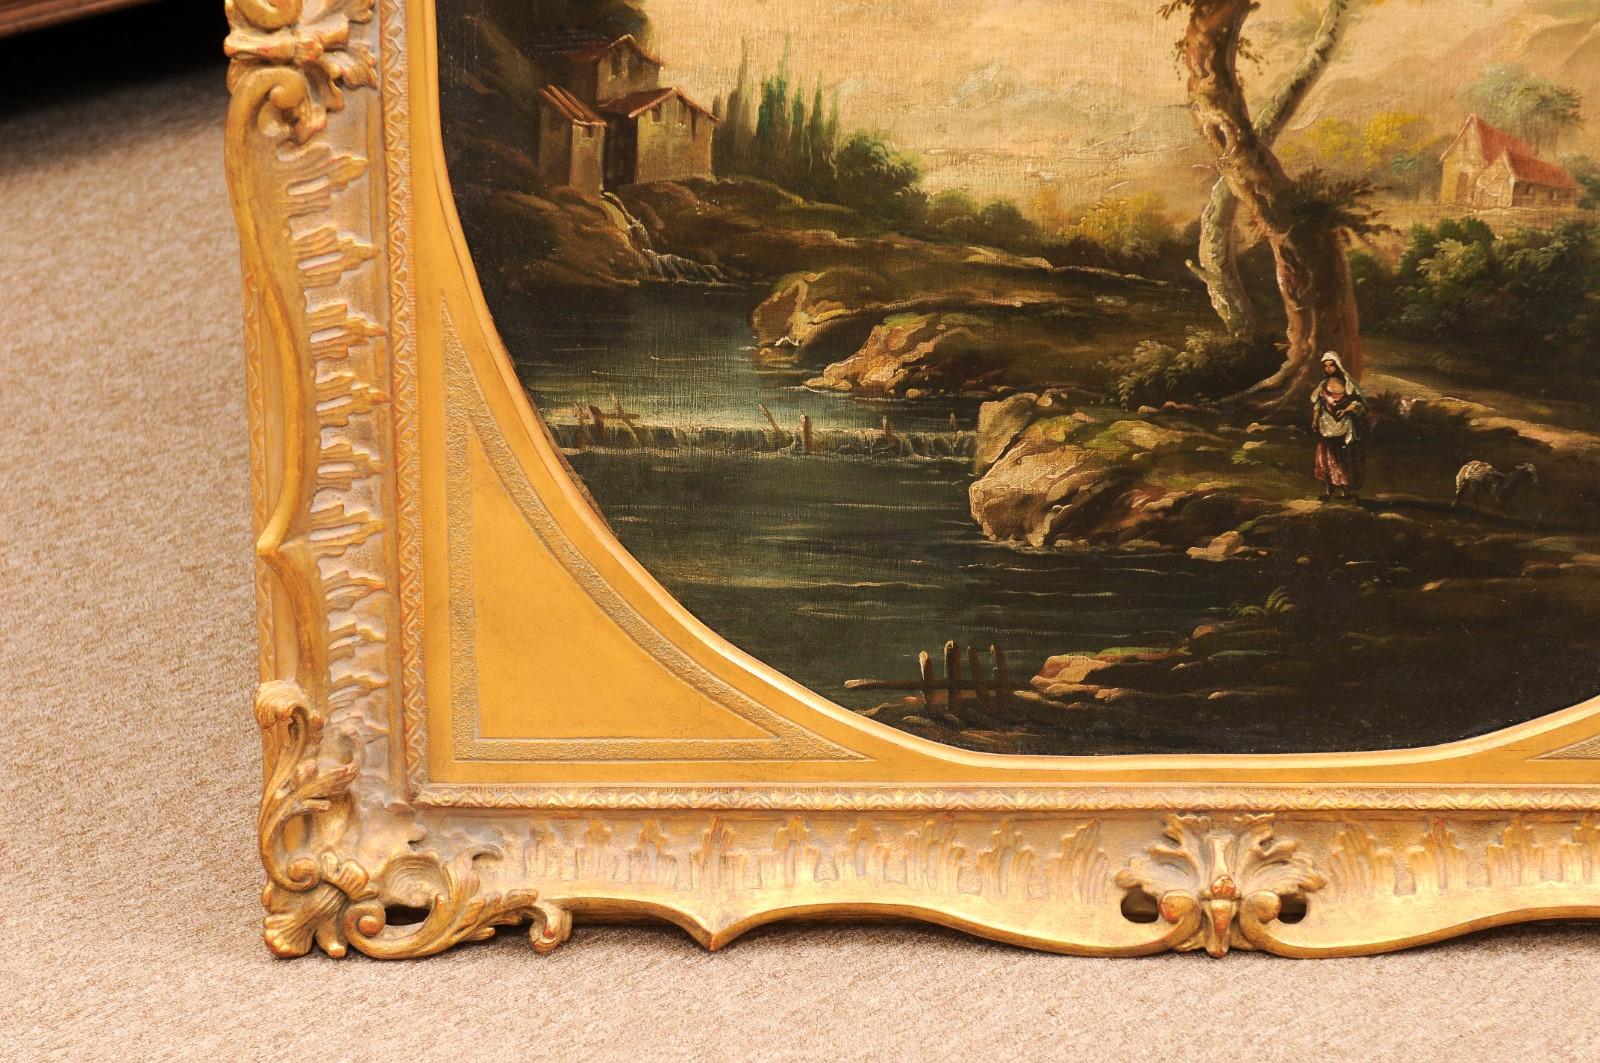 Large 19th Century English Oil on Canvas Landscape Painting in Gilt Frame For Sale 6